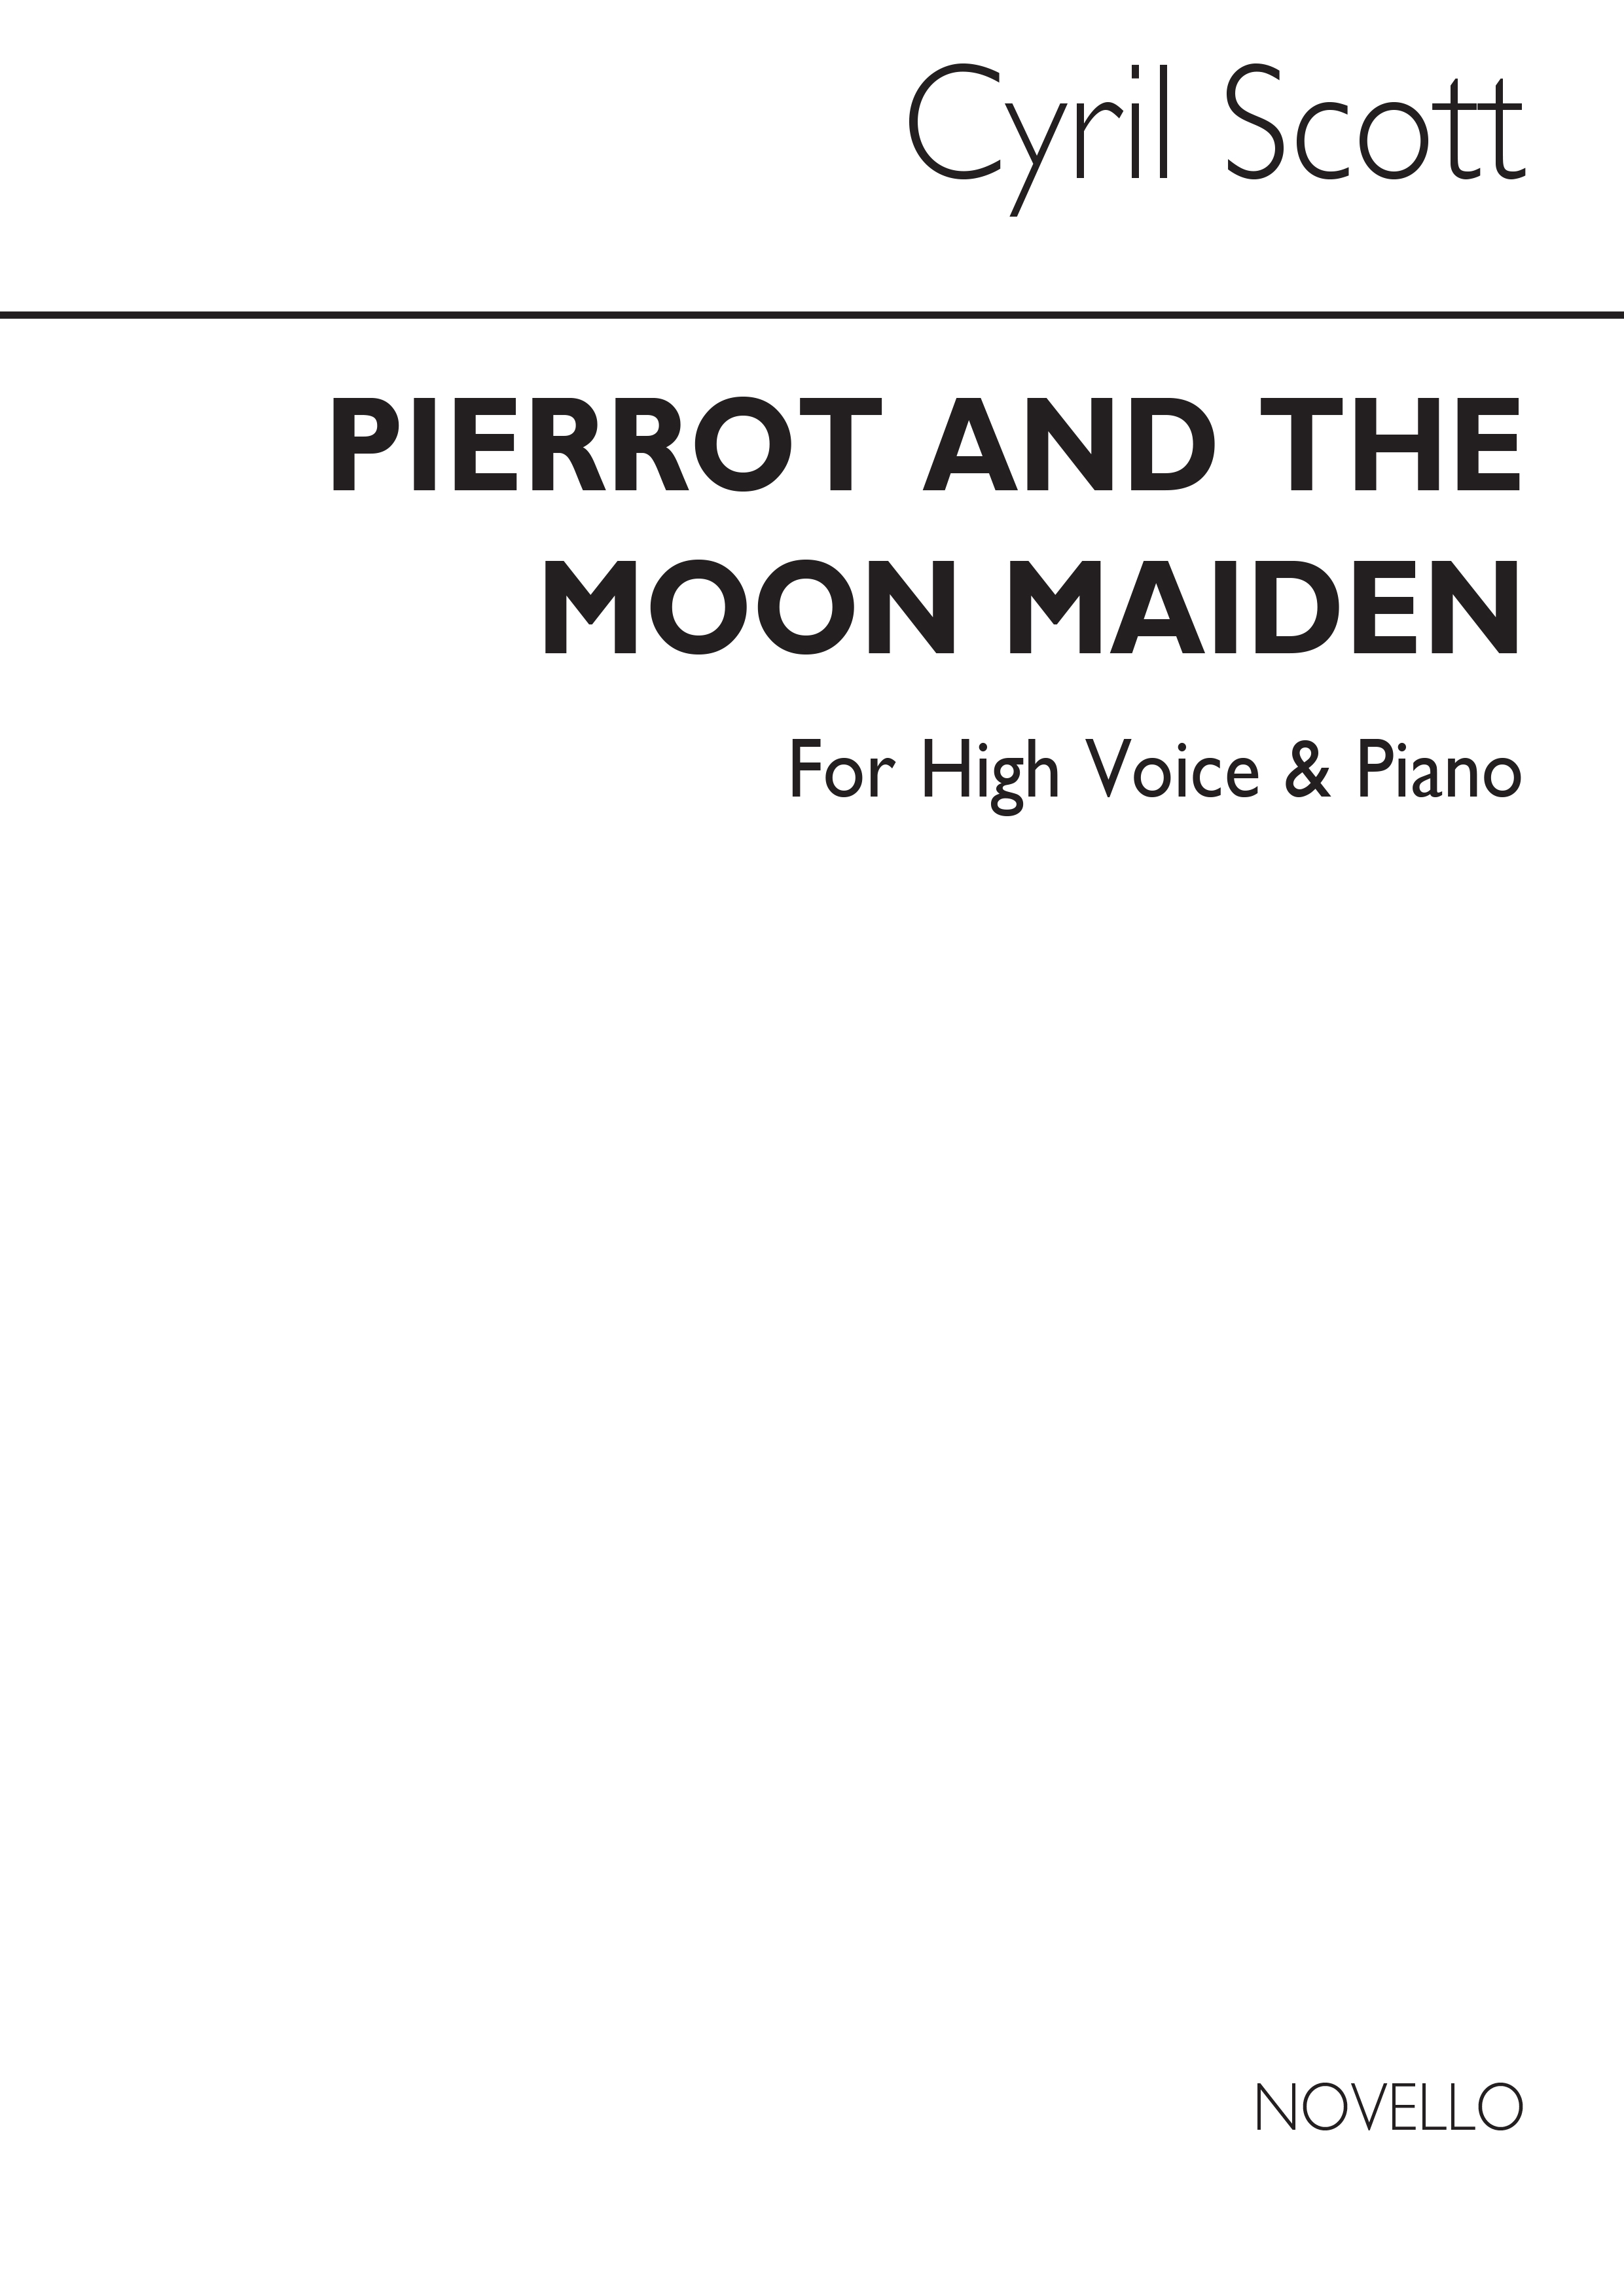 Cyril Scott: Pierrot And The Moon Maiden (Key-e): High Voice: Vocal Work